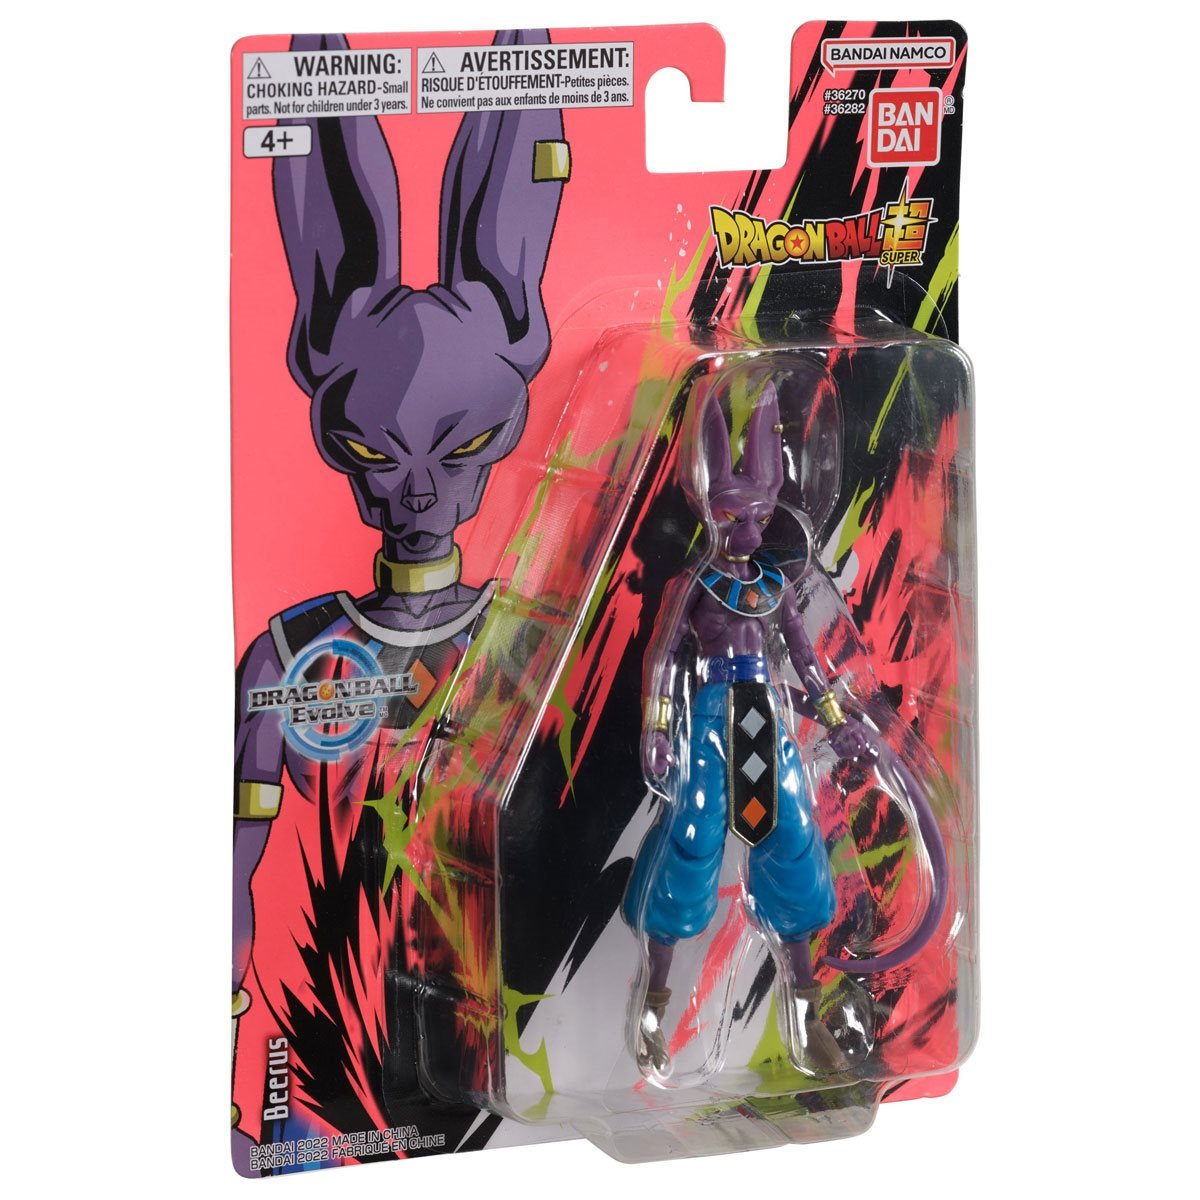 Bandai Dragonball Z Super Beerus Action Figure - 35858 for sale